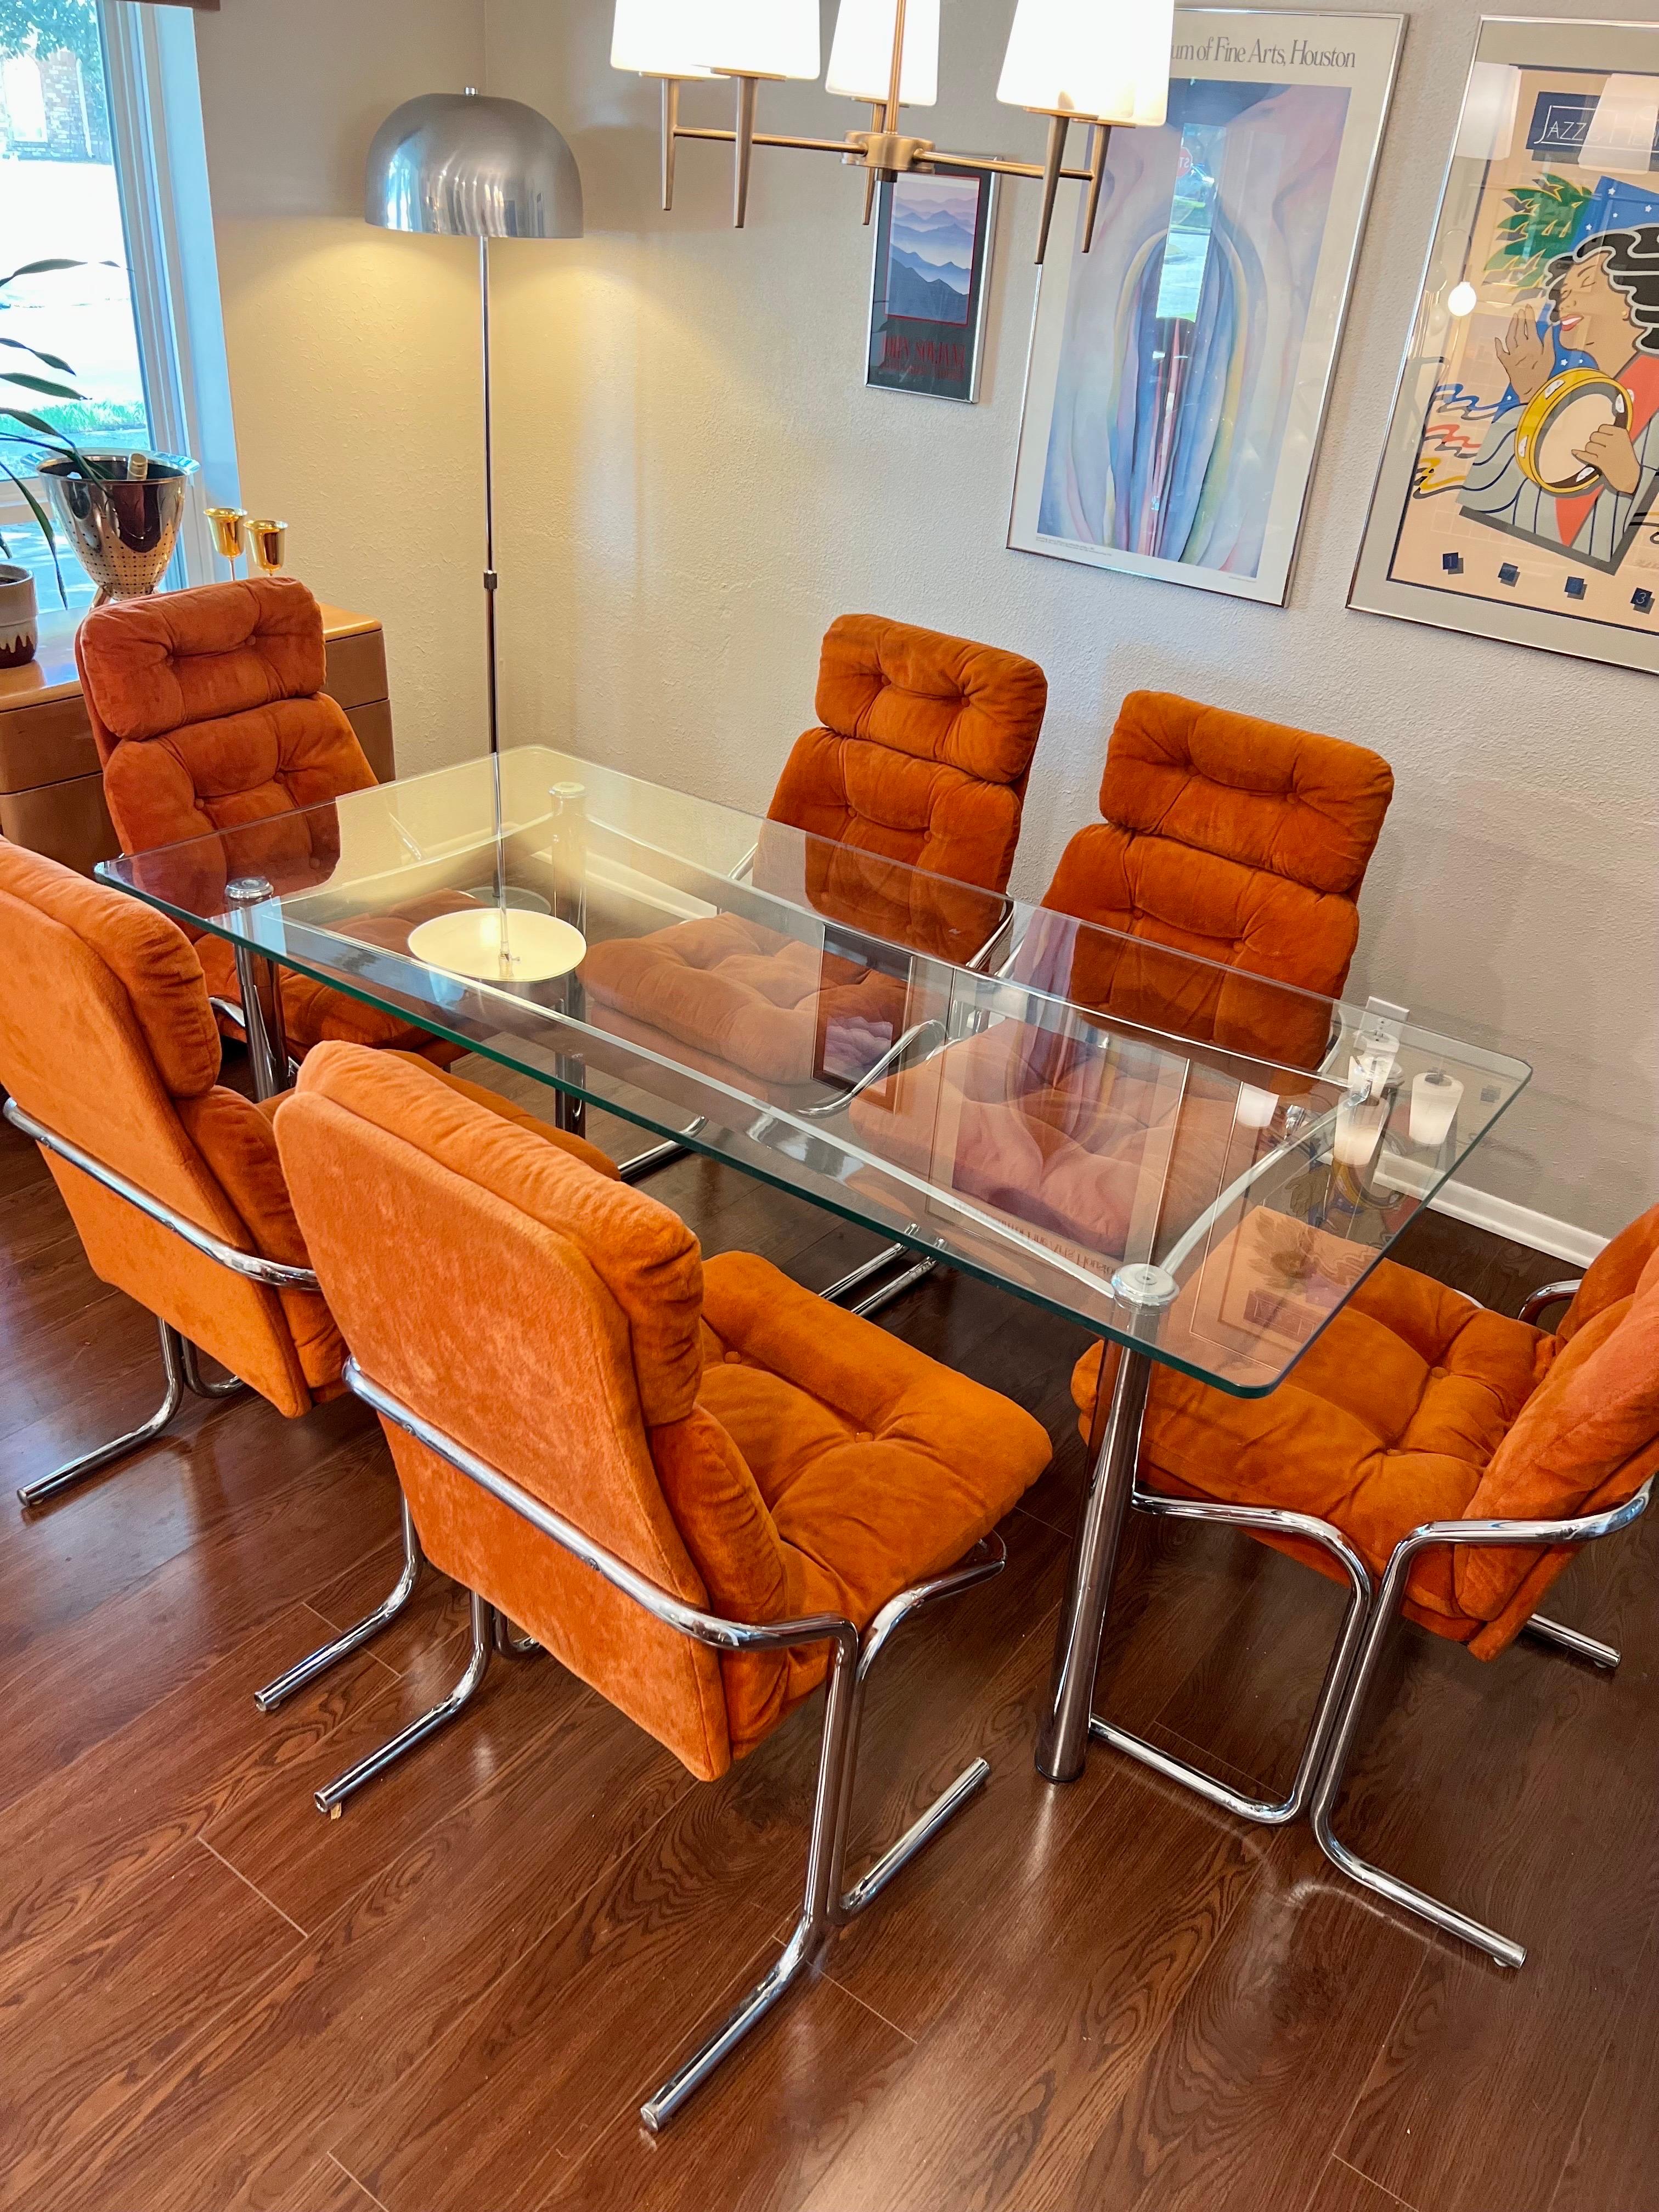 Late 20th Century Mid-Century Modern Orange Dining Set of 6 Chrome Chairs by Cal-Style Furniture